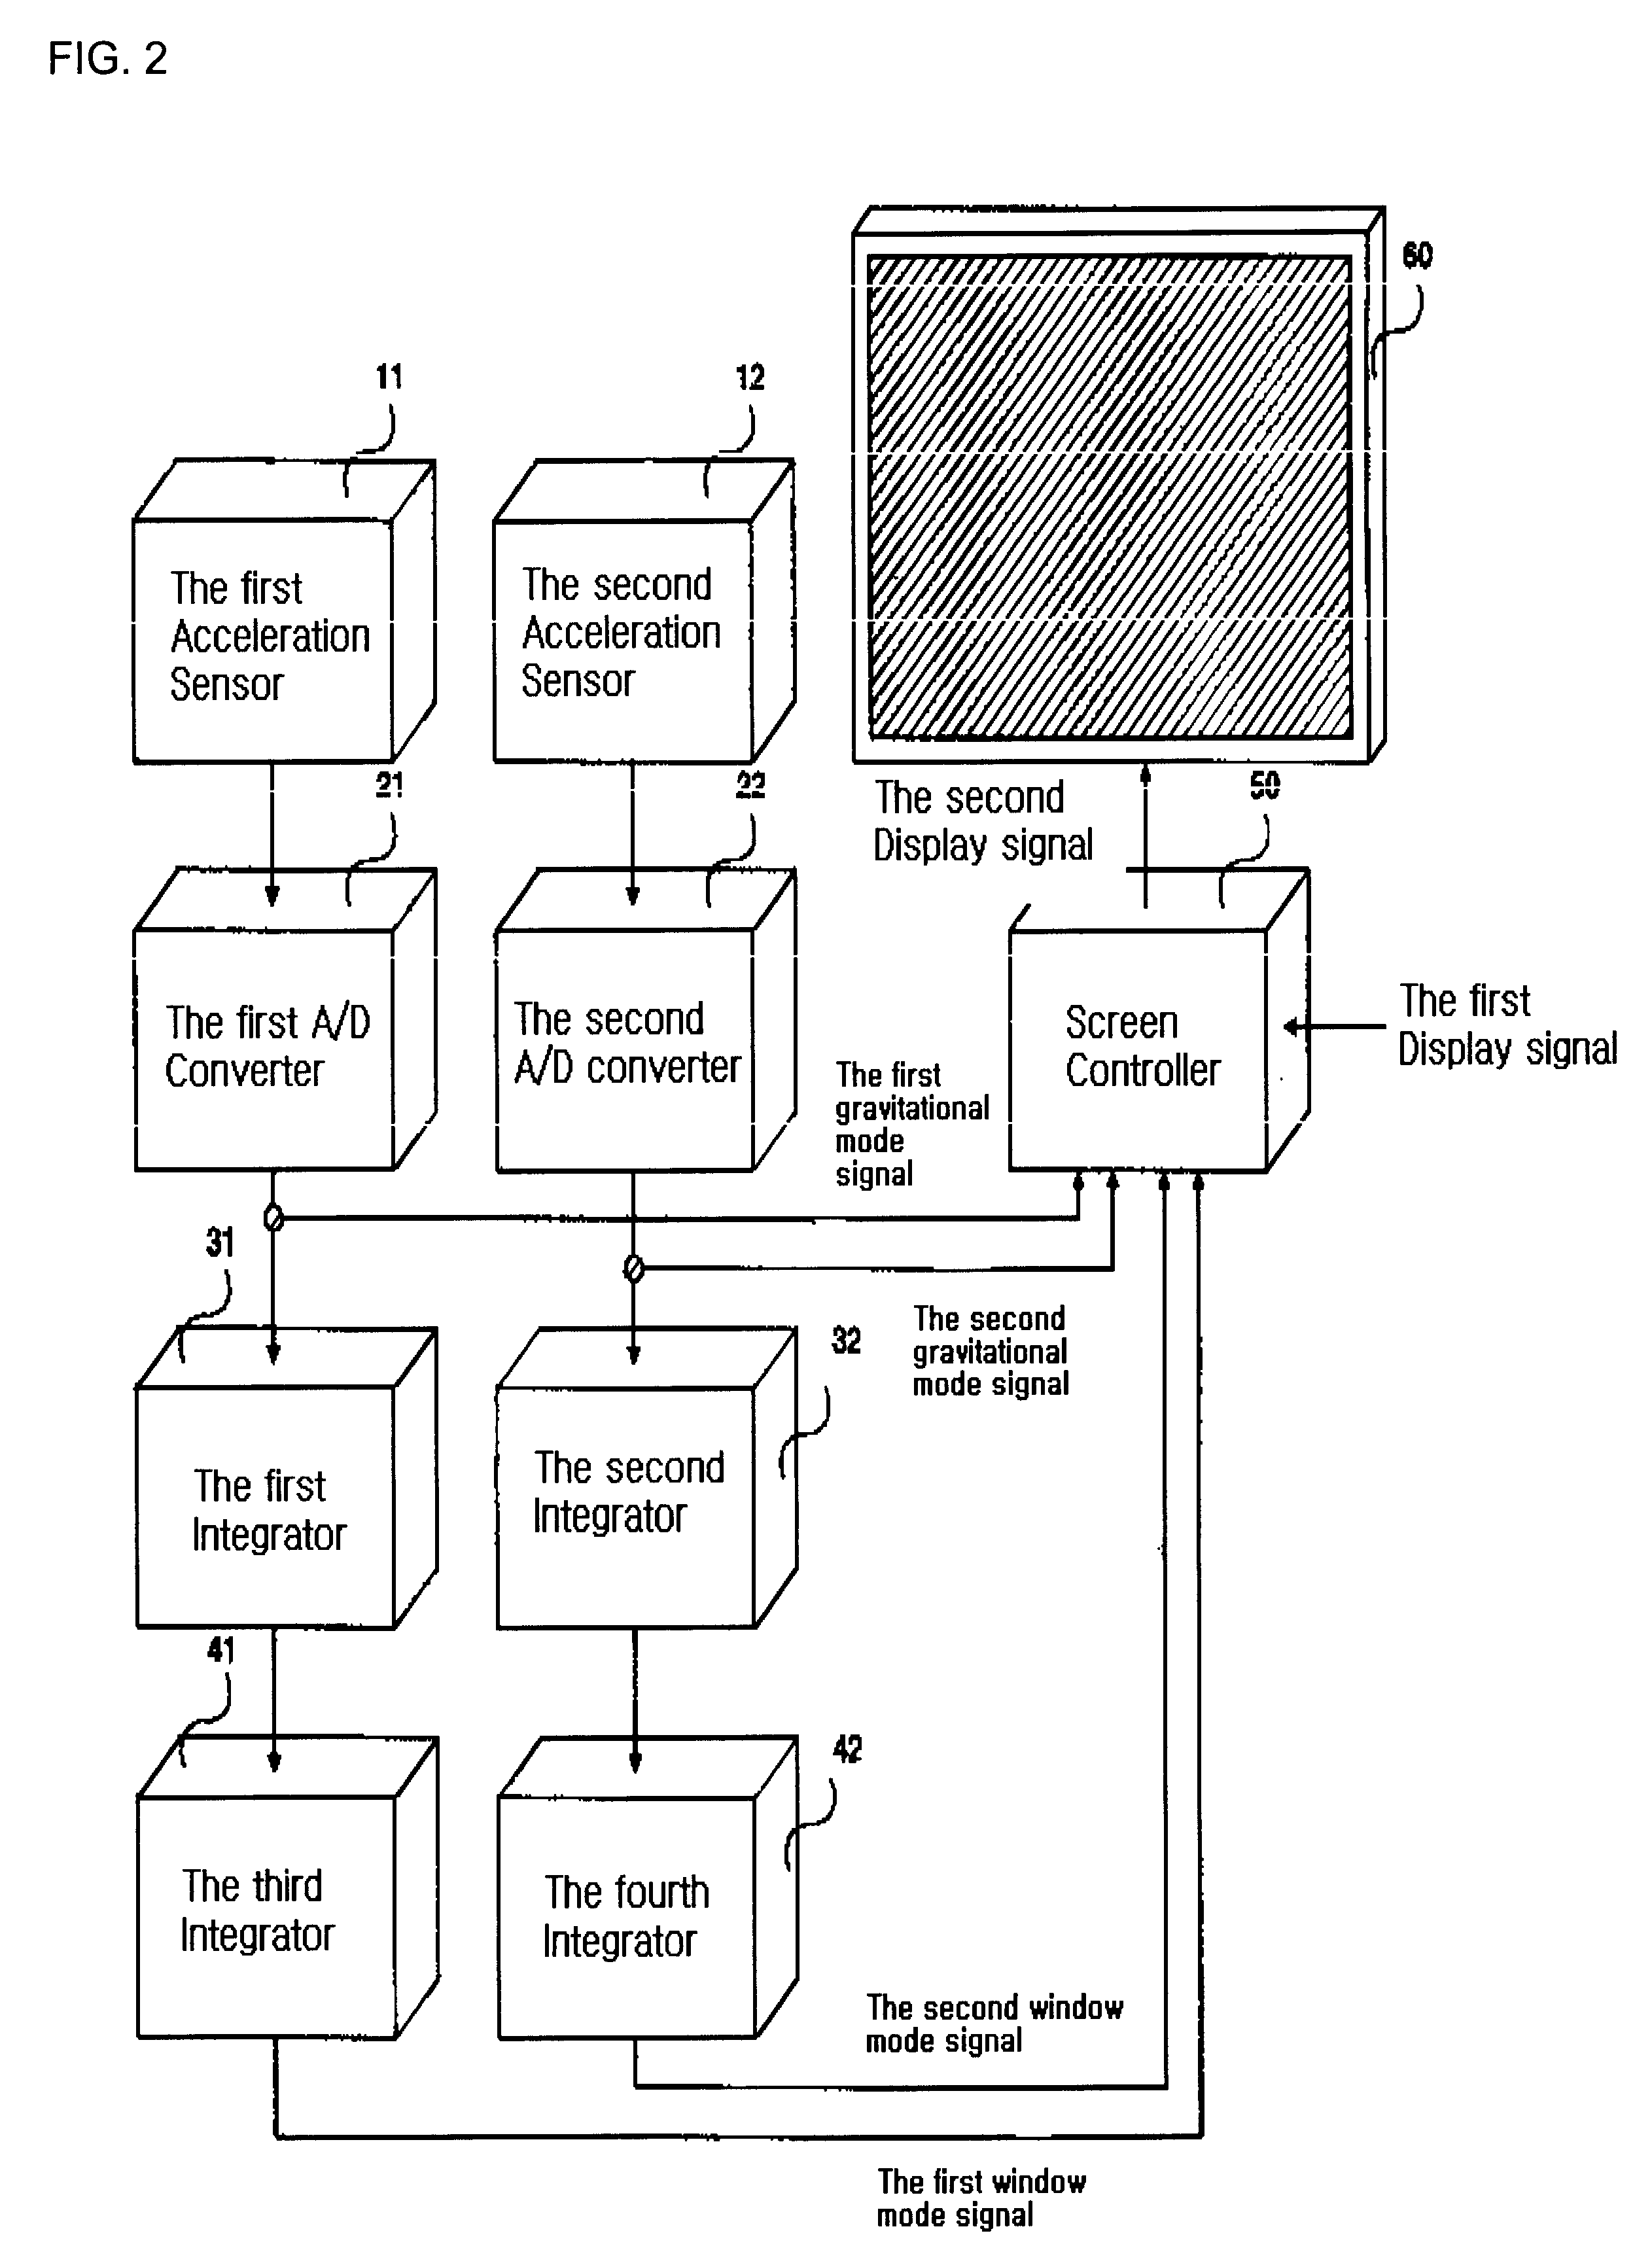 Apparatus for moving display screen of mobile computer device